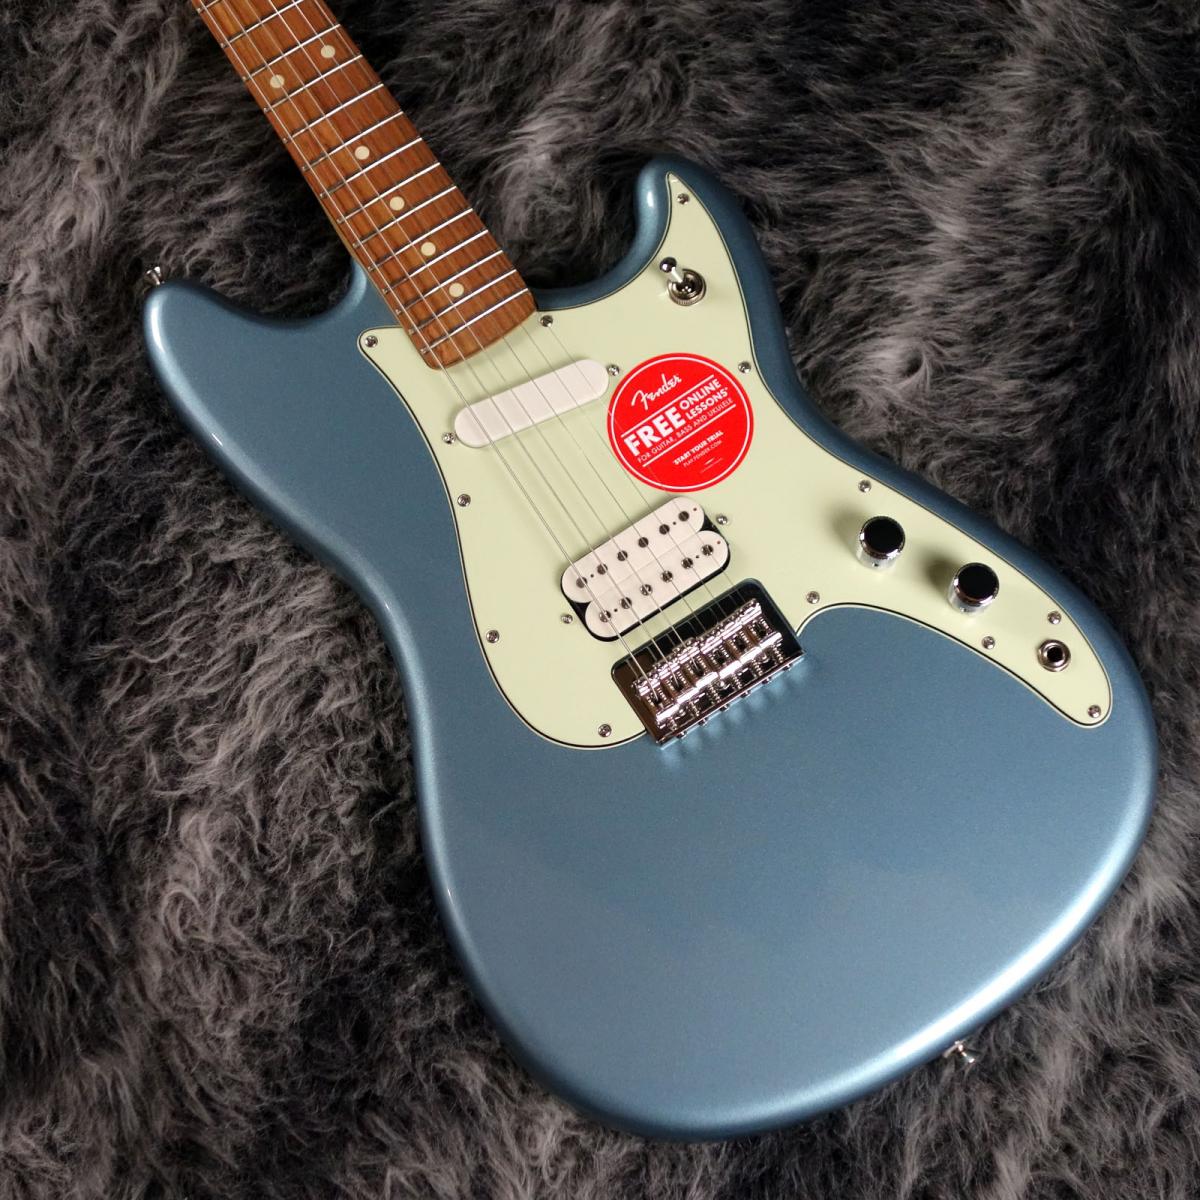 Fender Mexico duo sonic  HS PF 美品